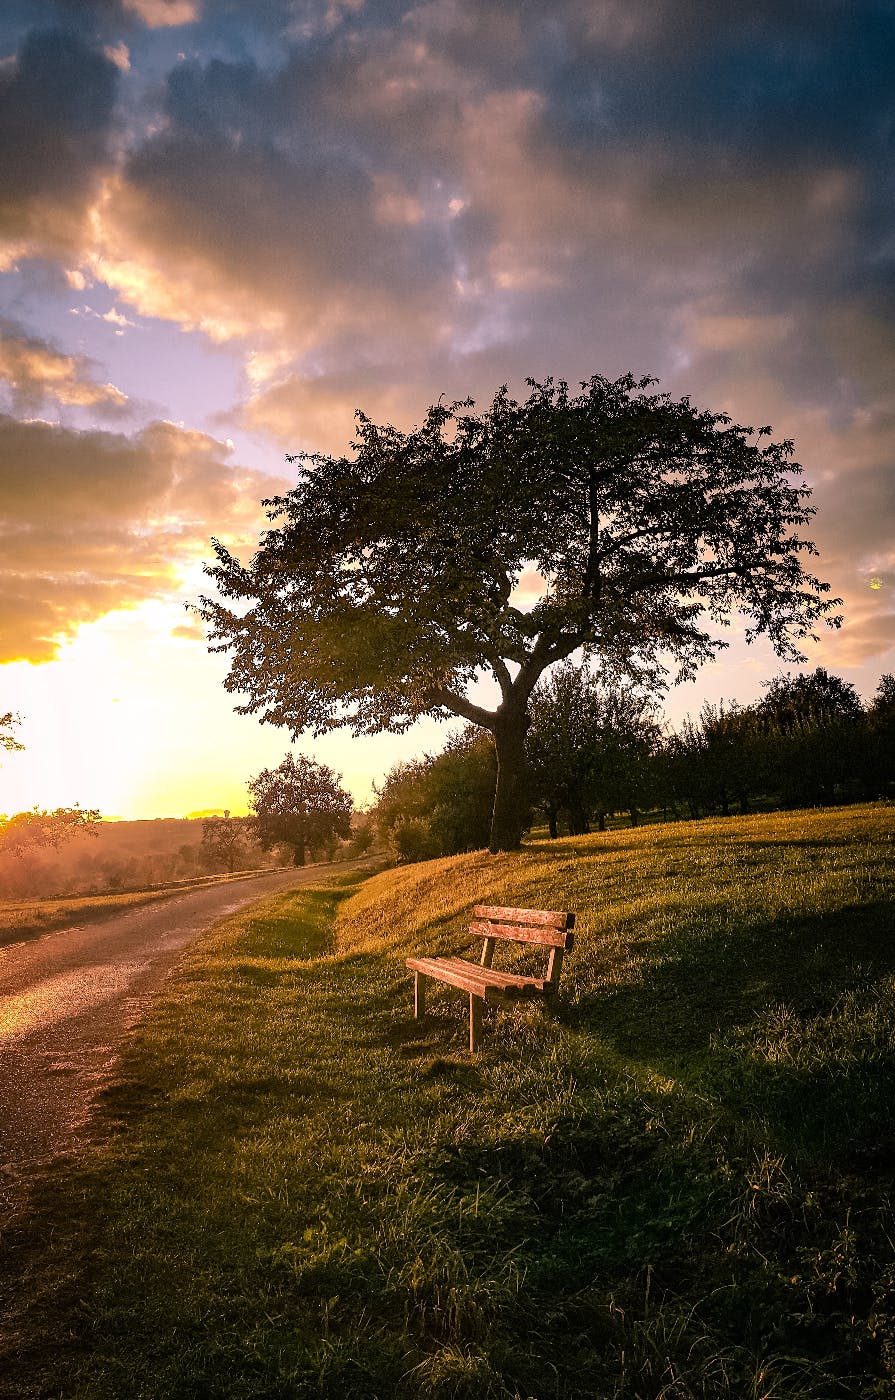 A beautiful landscape with a path, a tree and a bench